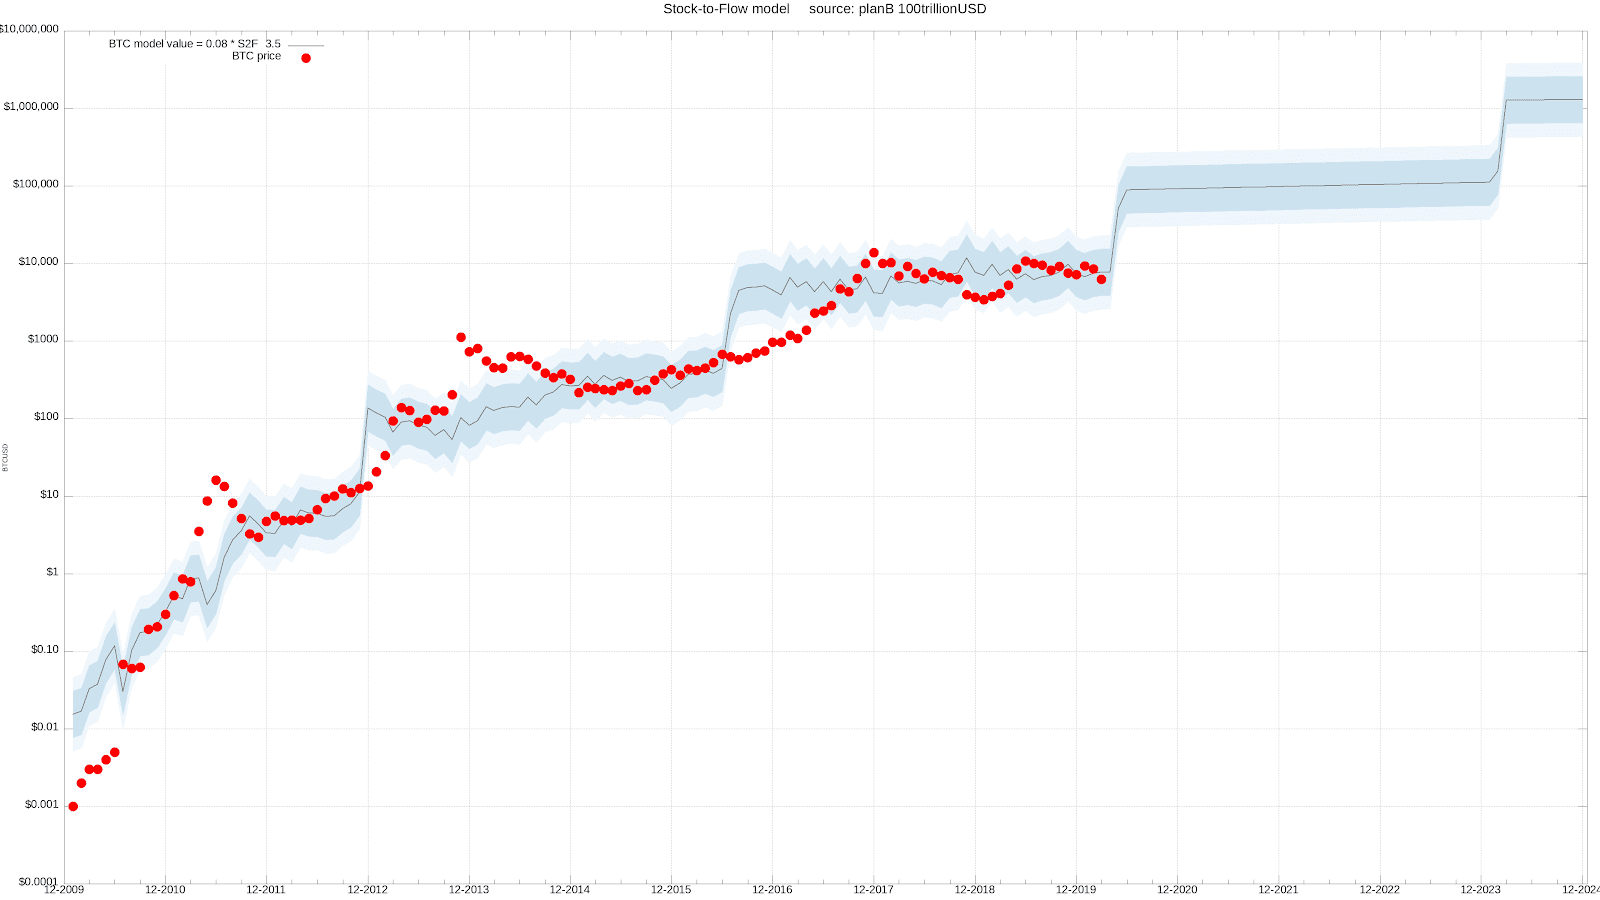 Bitcoin stock-to-flow price model as of March 24